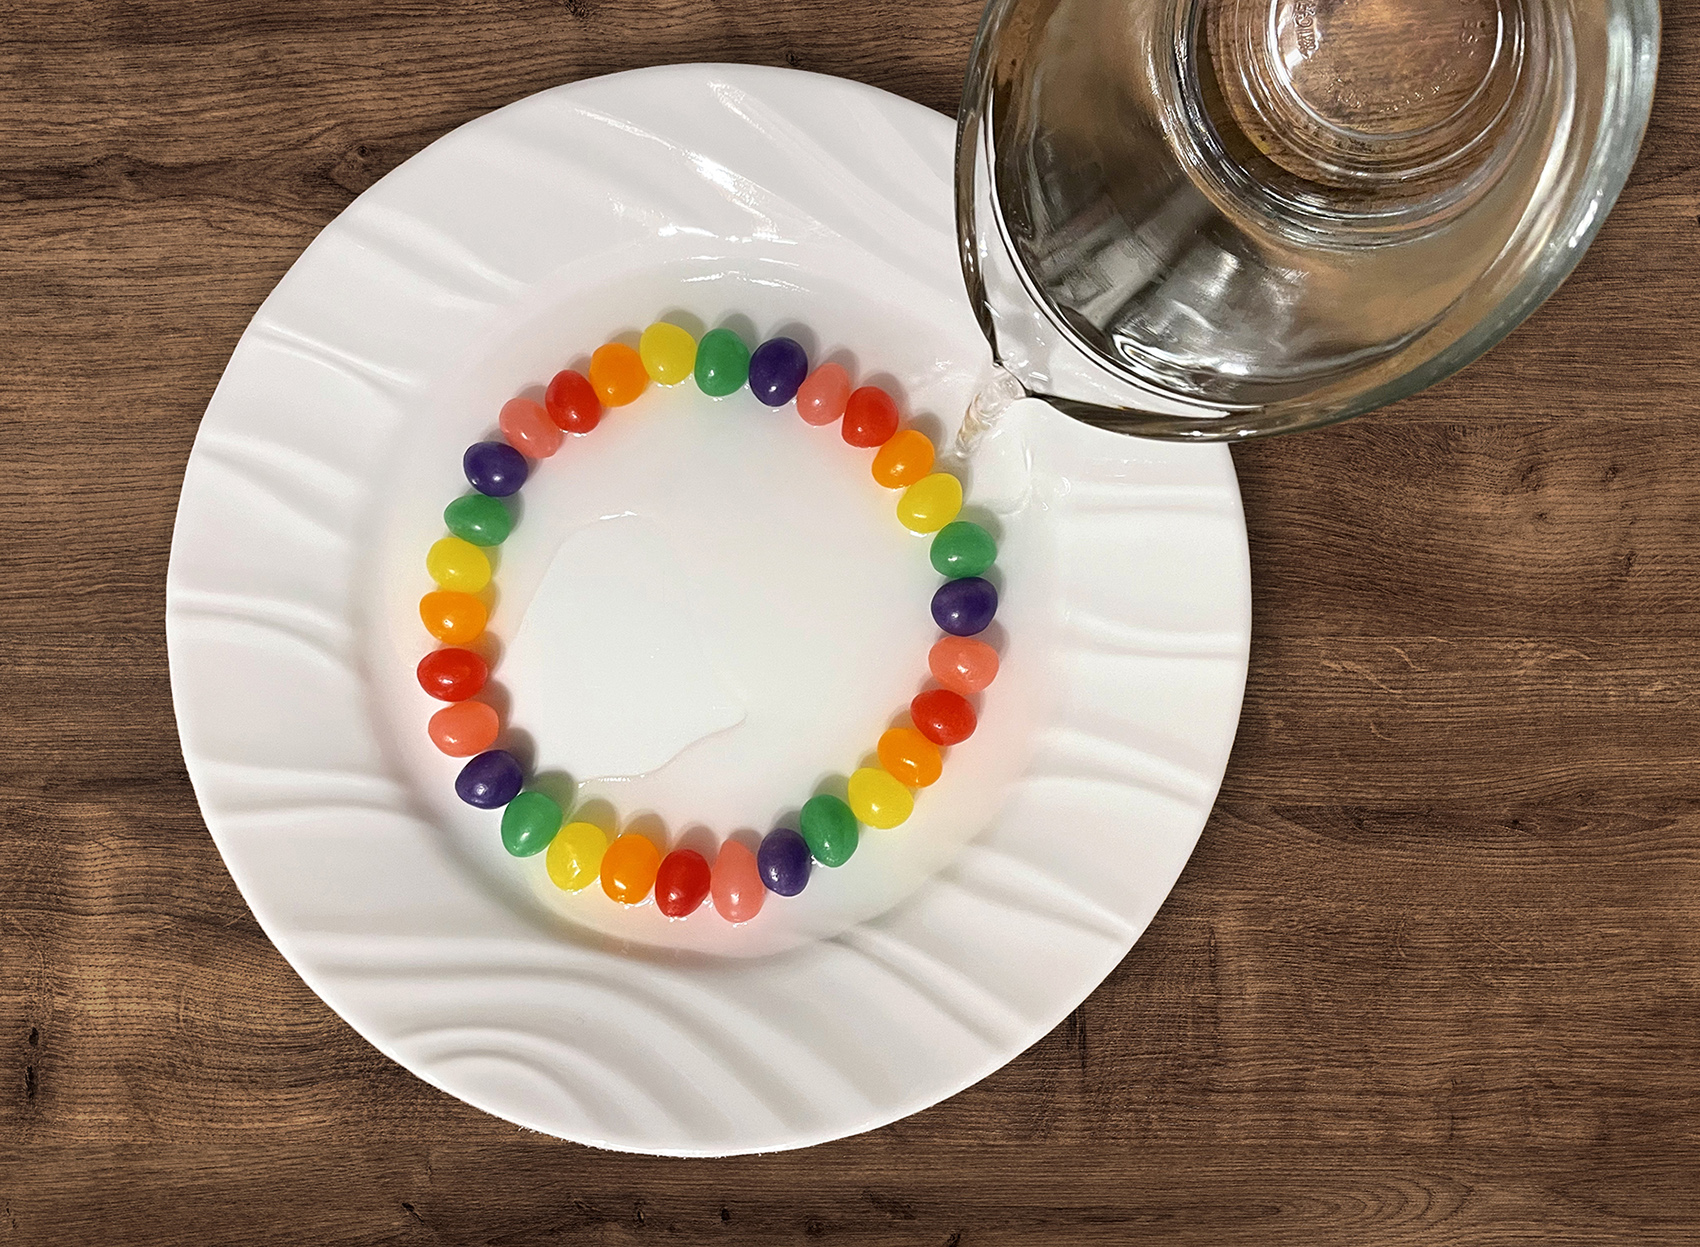  Jelly Bean Science Project